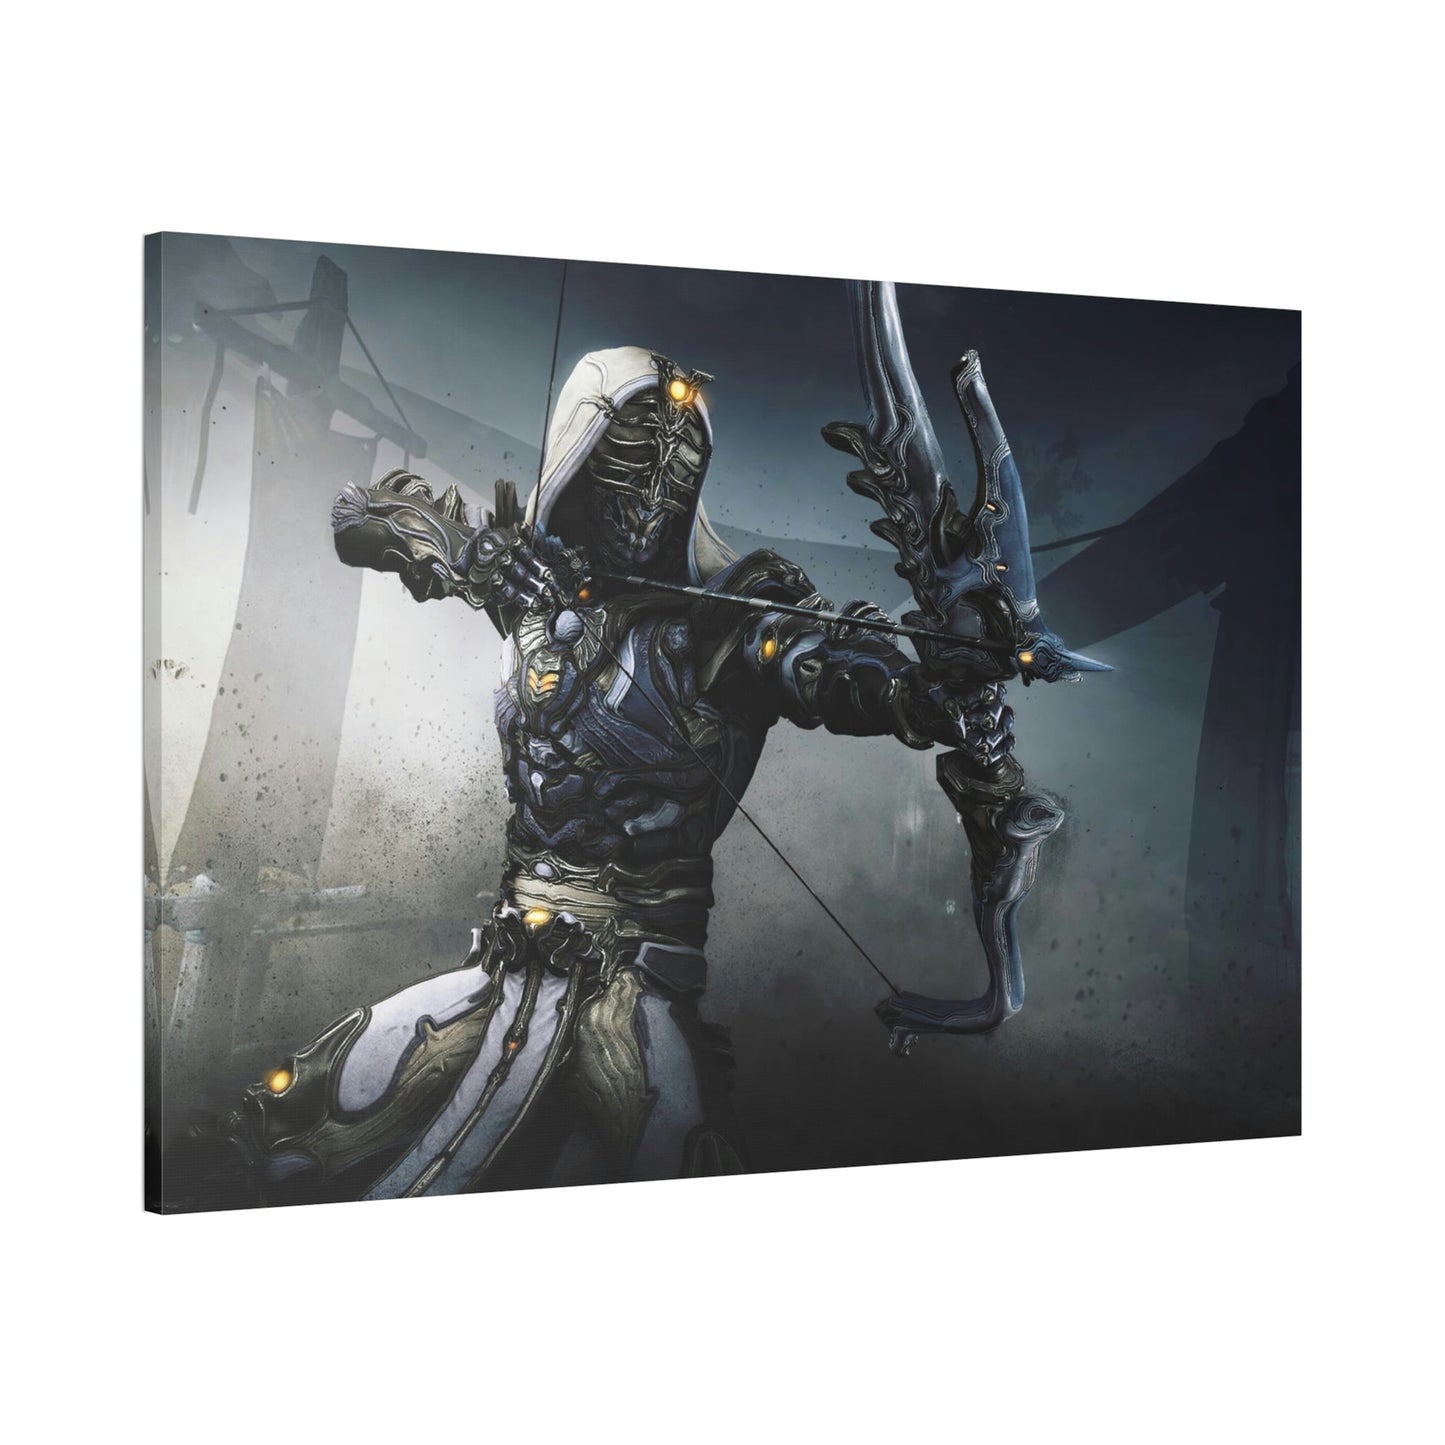 Warframe's Planets: A Collection of Canvas Art Prints for Fans of the Game's Worlds